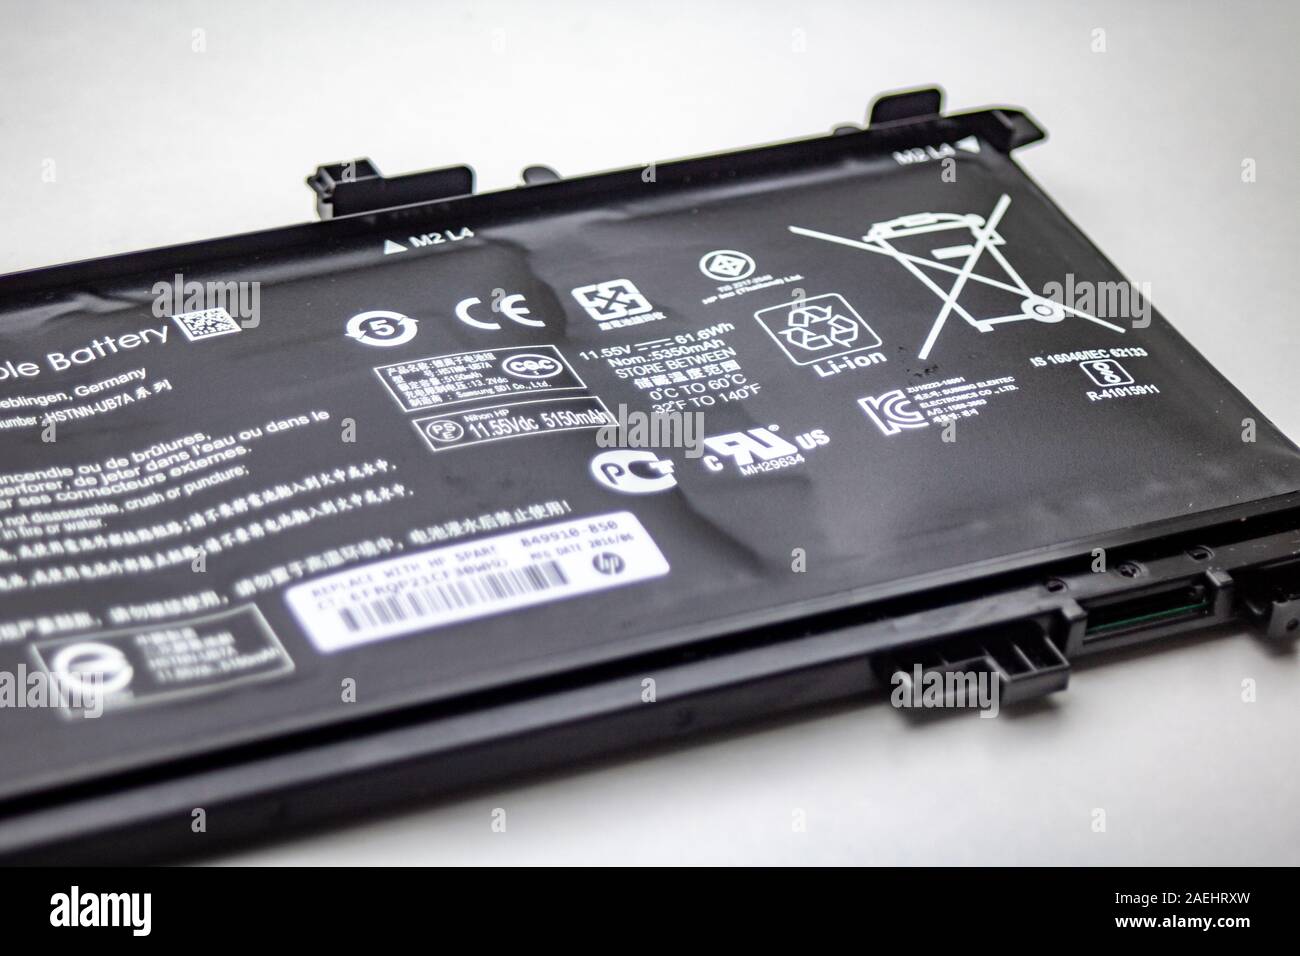 Heidelberg, Germany - August 02, 2019: Replacement of a defect, bloated HP Notebook Lithium-ion battery Stock Photo